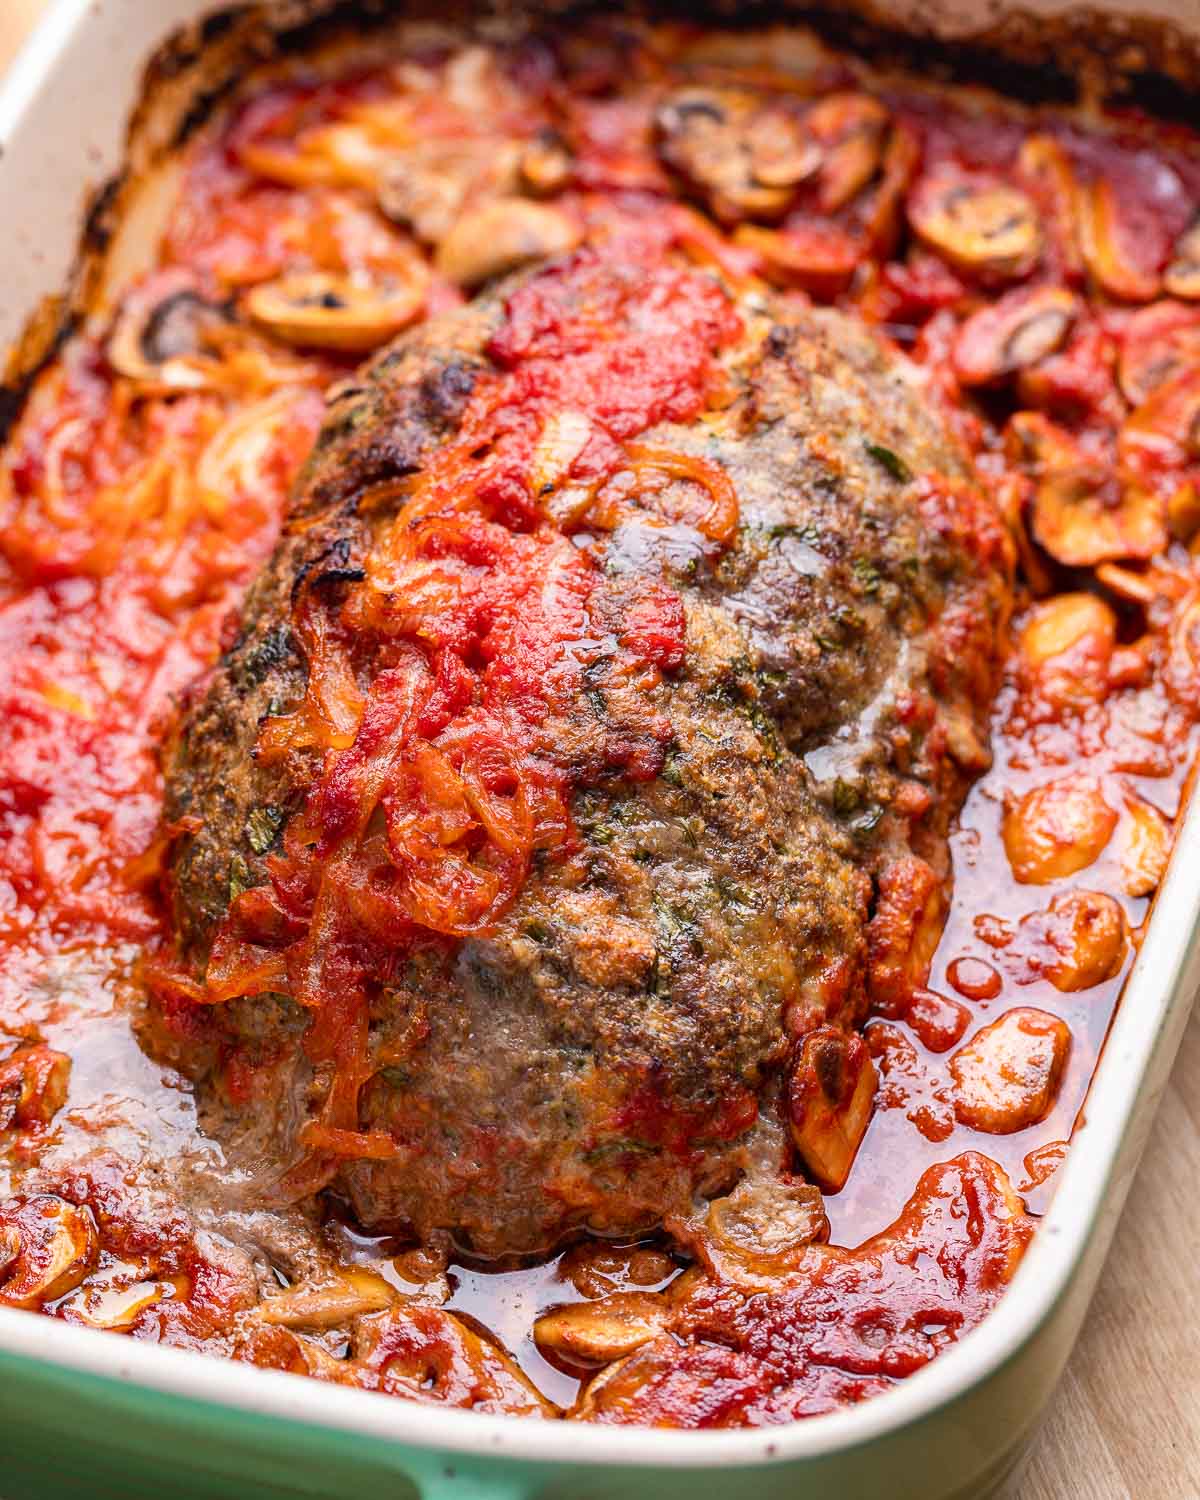 Full meatloaf in green baking dish.